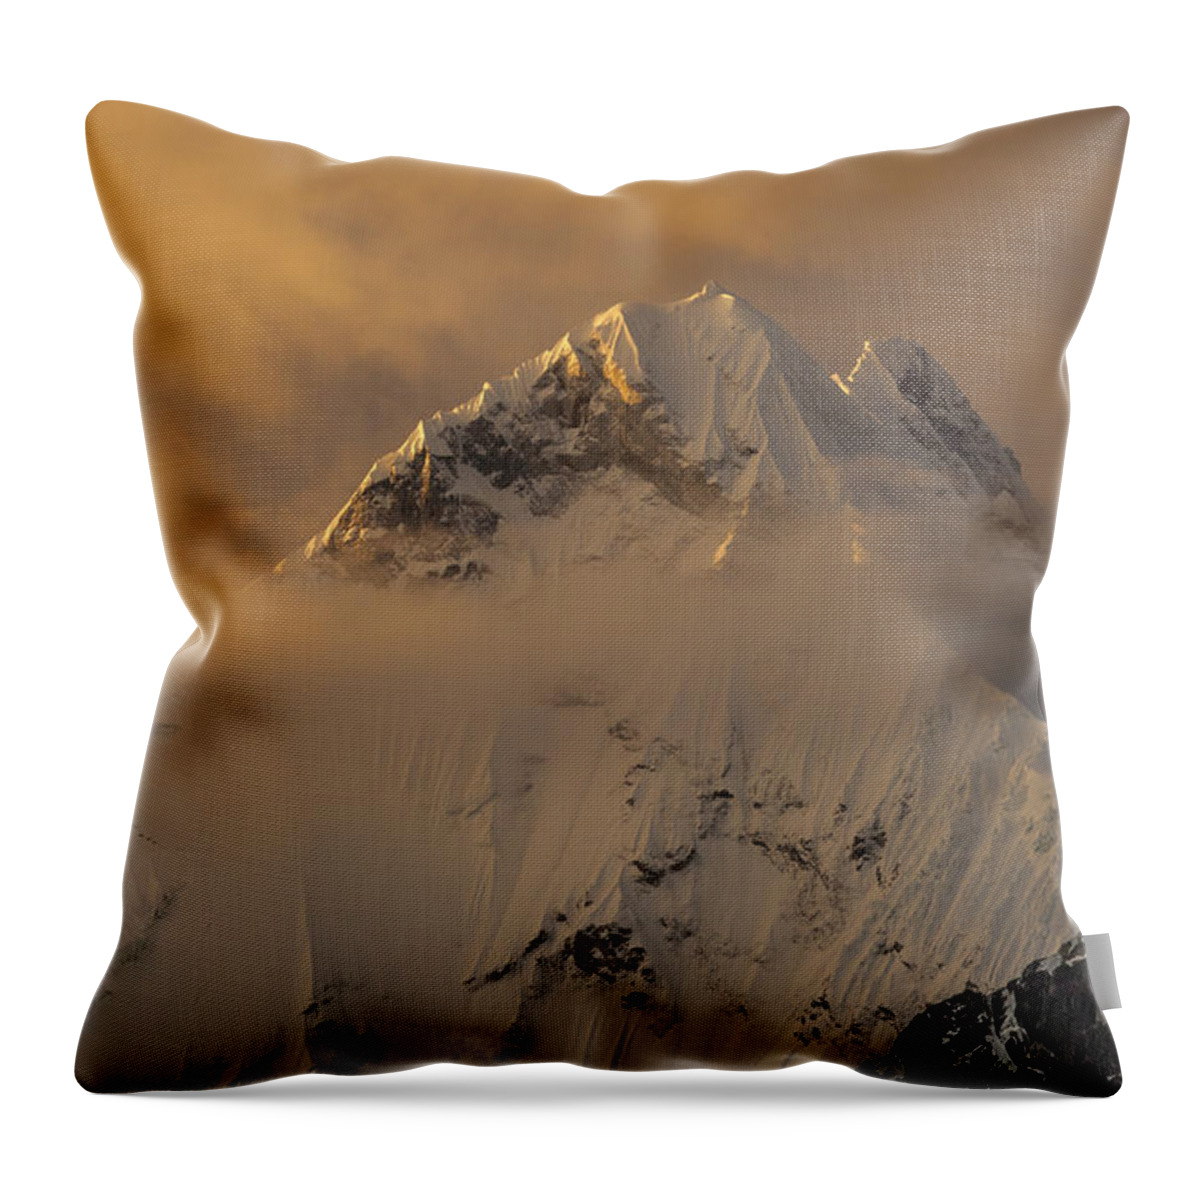 00498216 Throw Pillow featuring the photograph Yerupaja Summit Ridge 6617m At Sunset by Colin Monteath